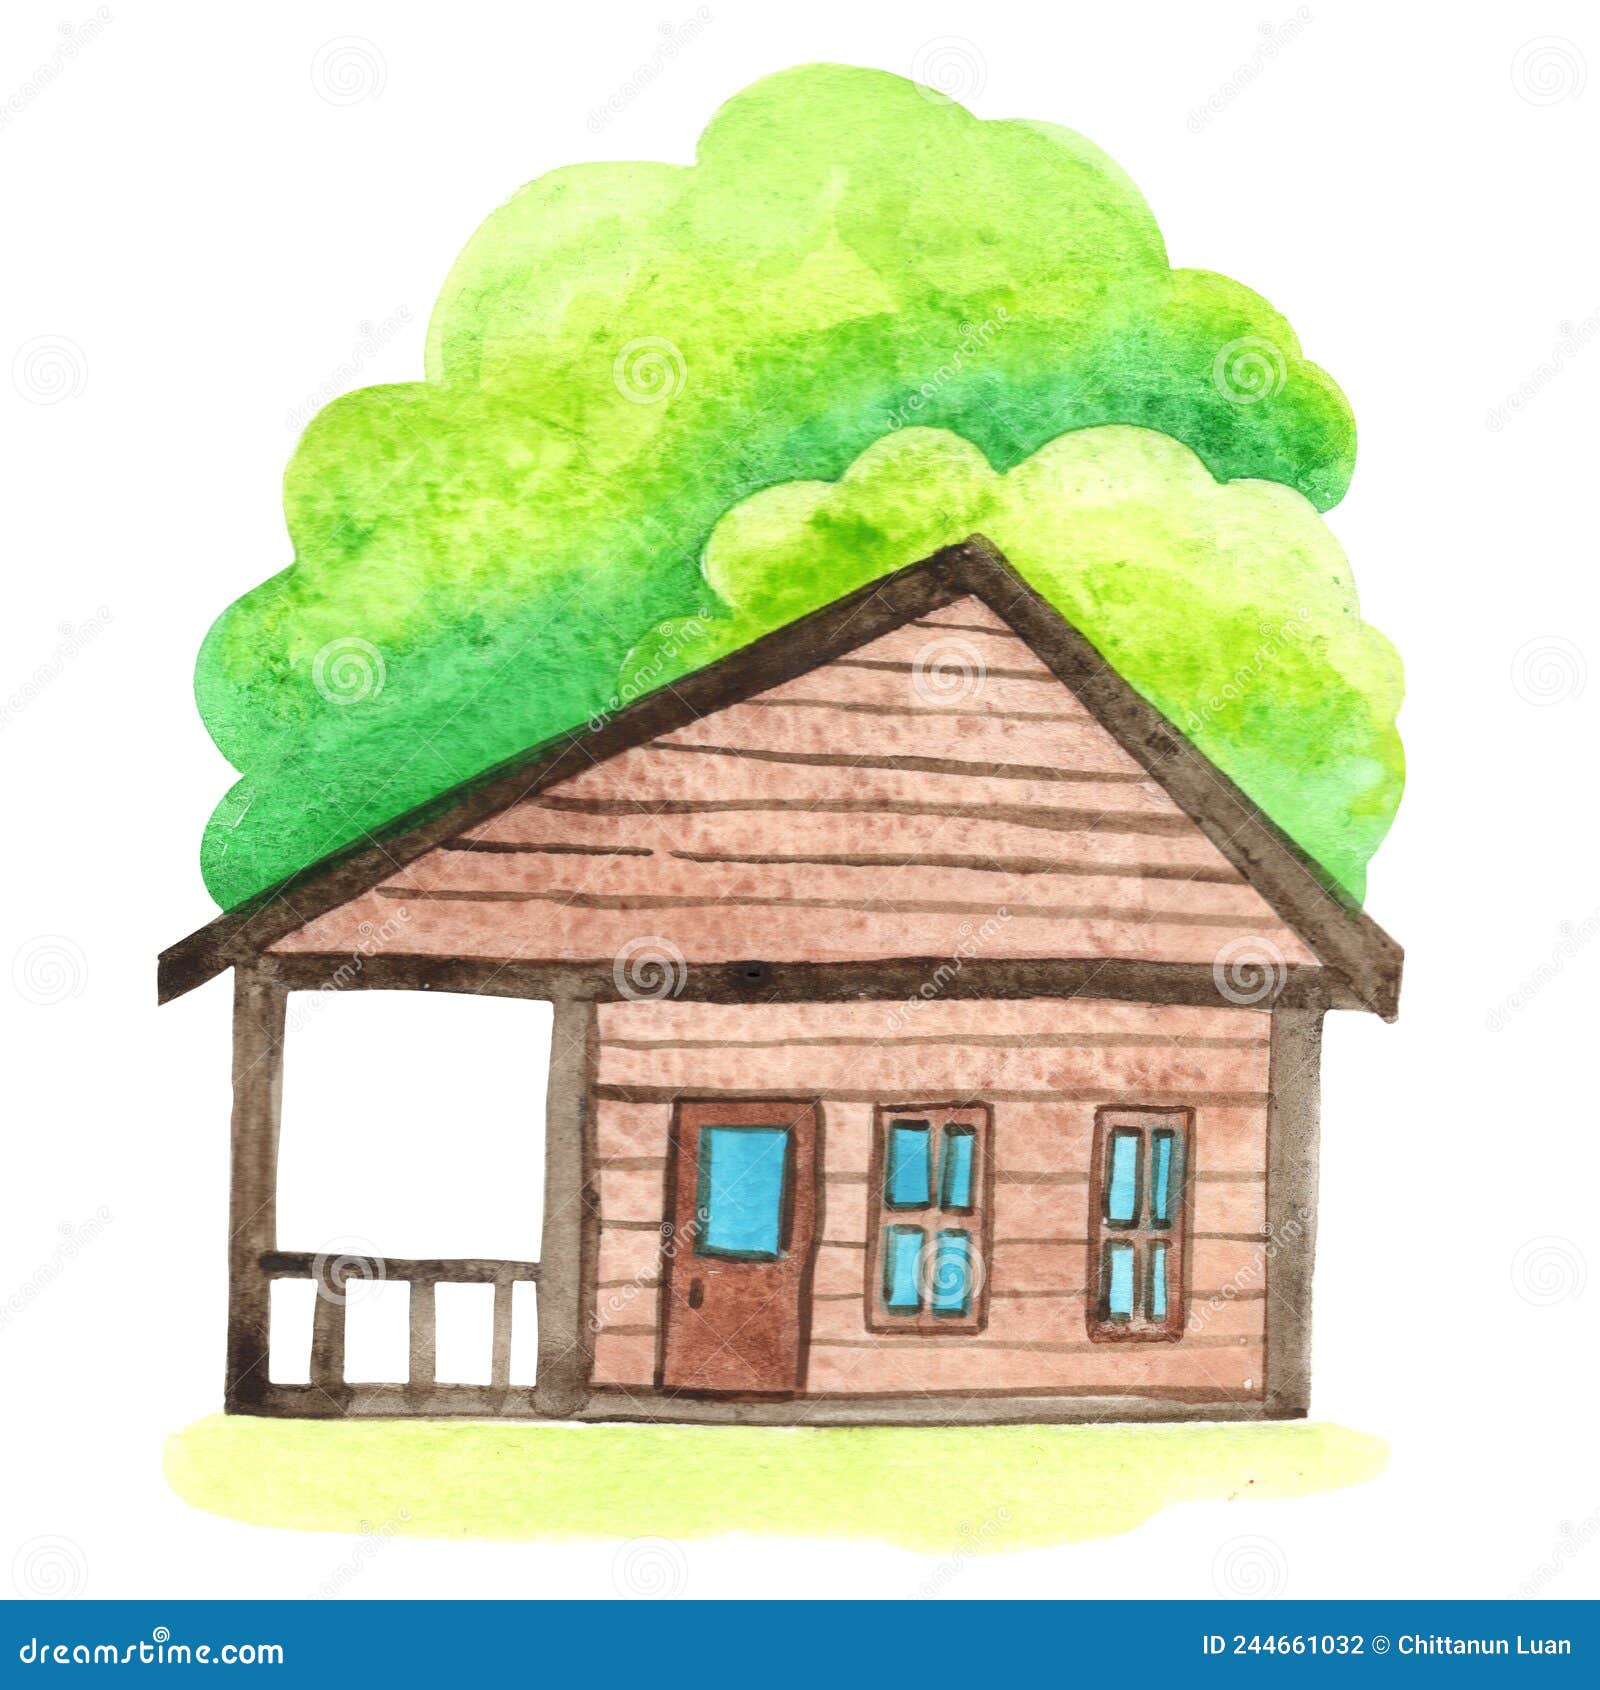 how to draw a HOUSE easy Step by step | House Drawing Easy For Kids | Draw  a House for kids - YouTube